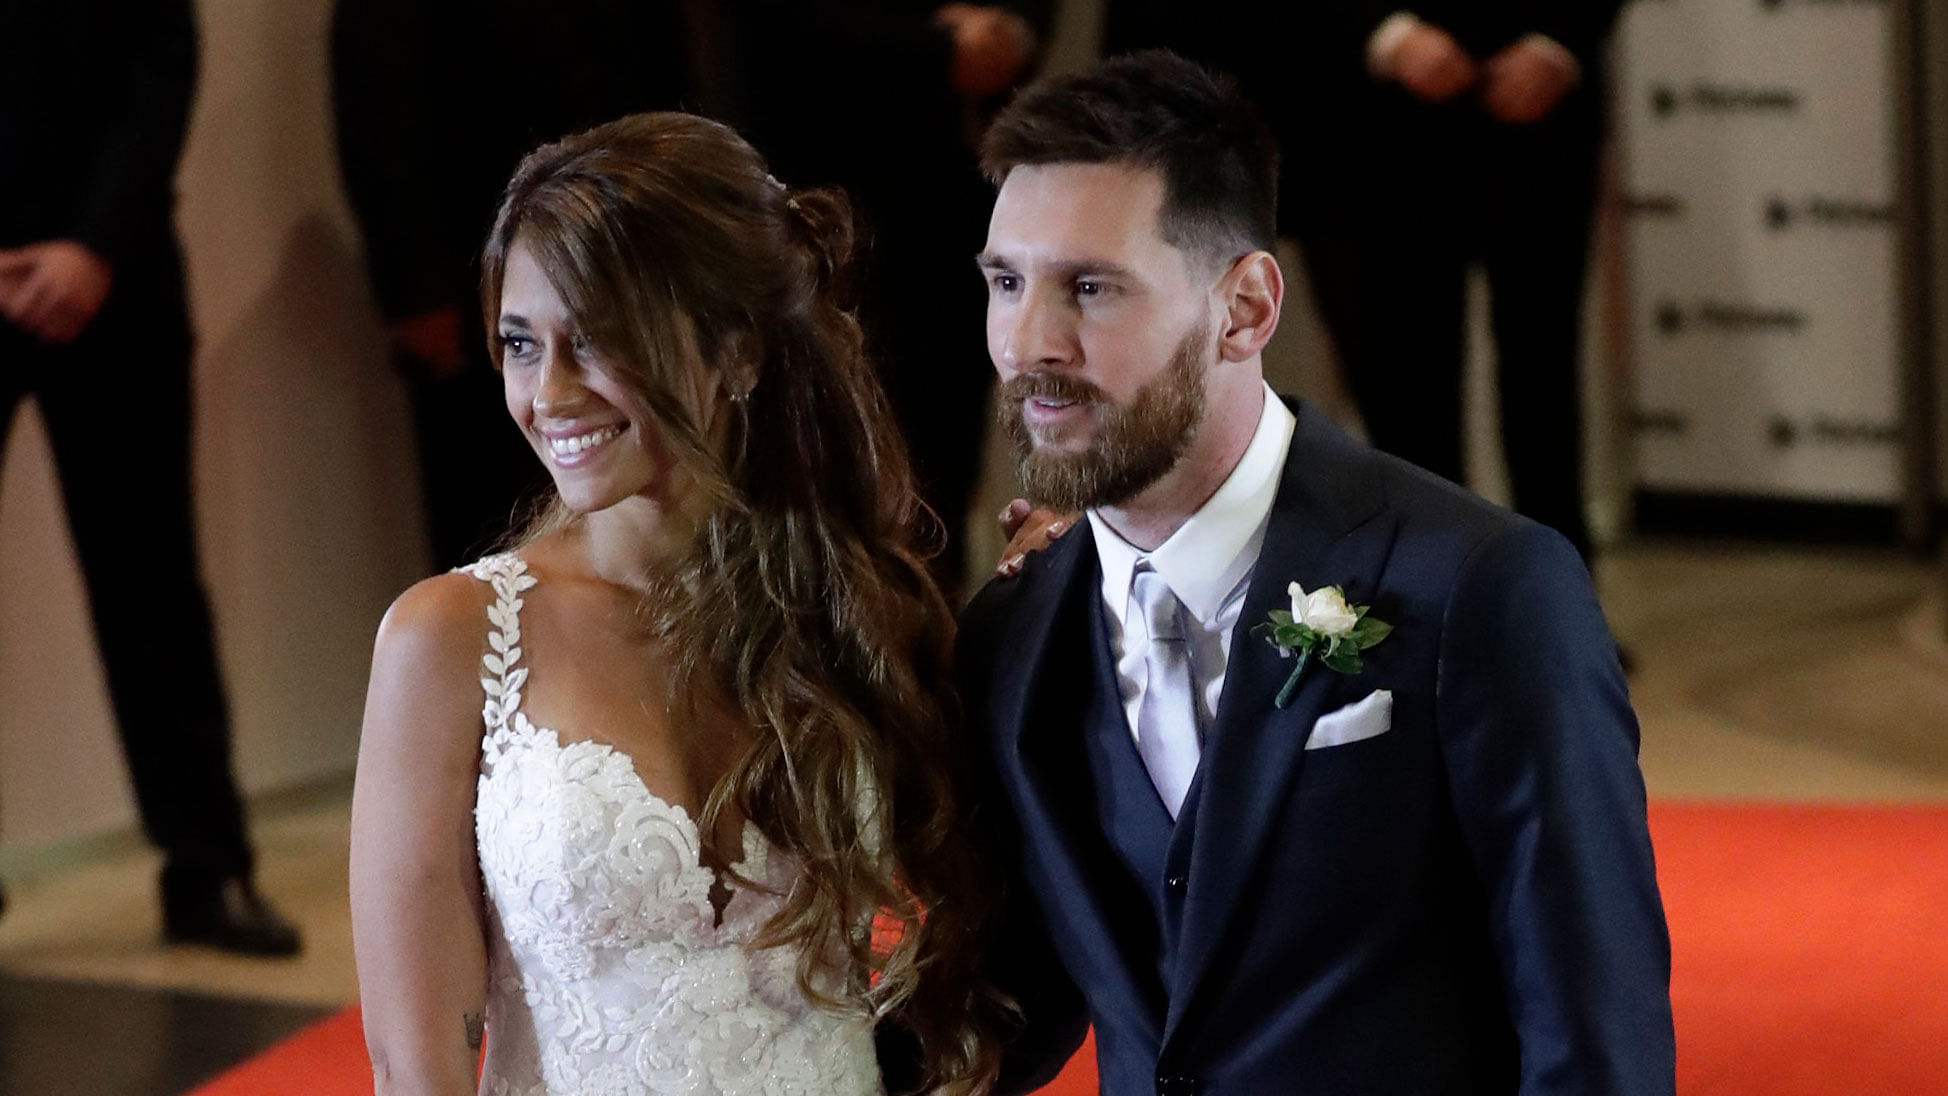 Lionel Messi poses for a picture with Antonella Roccuzzo in Rosario on Friday.